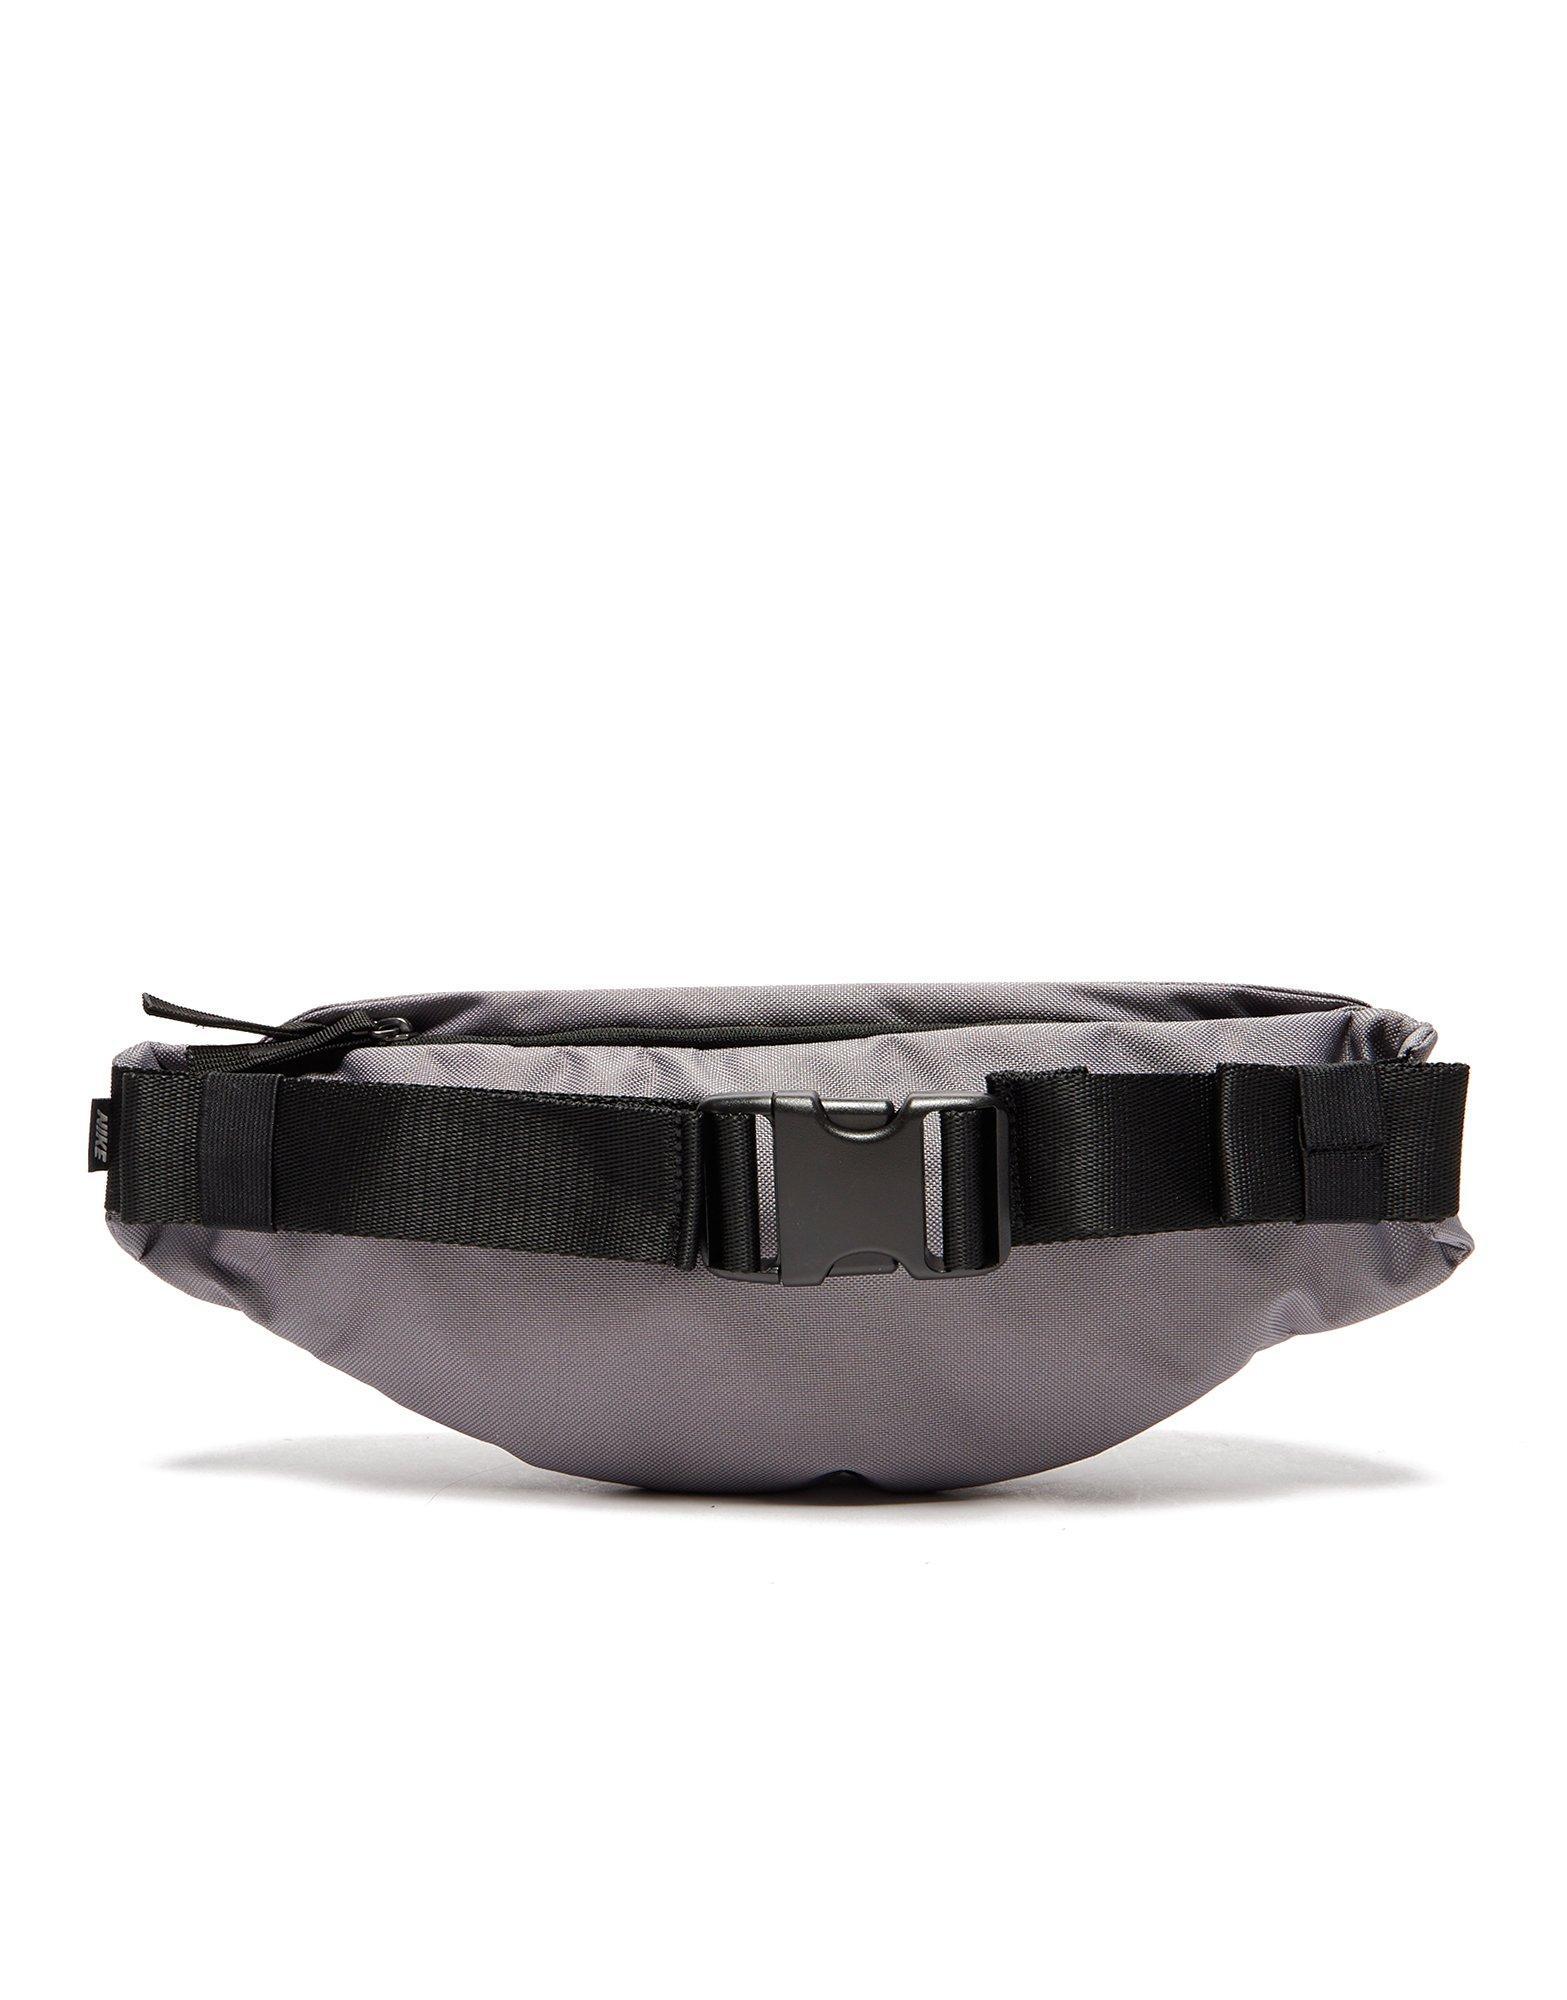 Nike Synthetic Waist Bag in Grey (Gray) for Men - Lyst